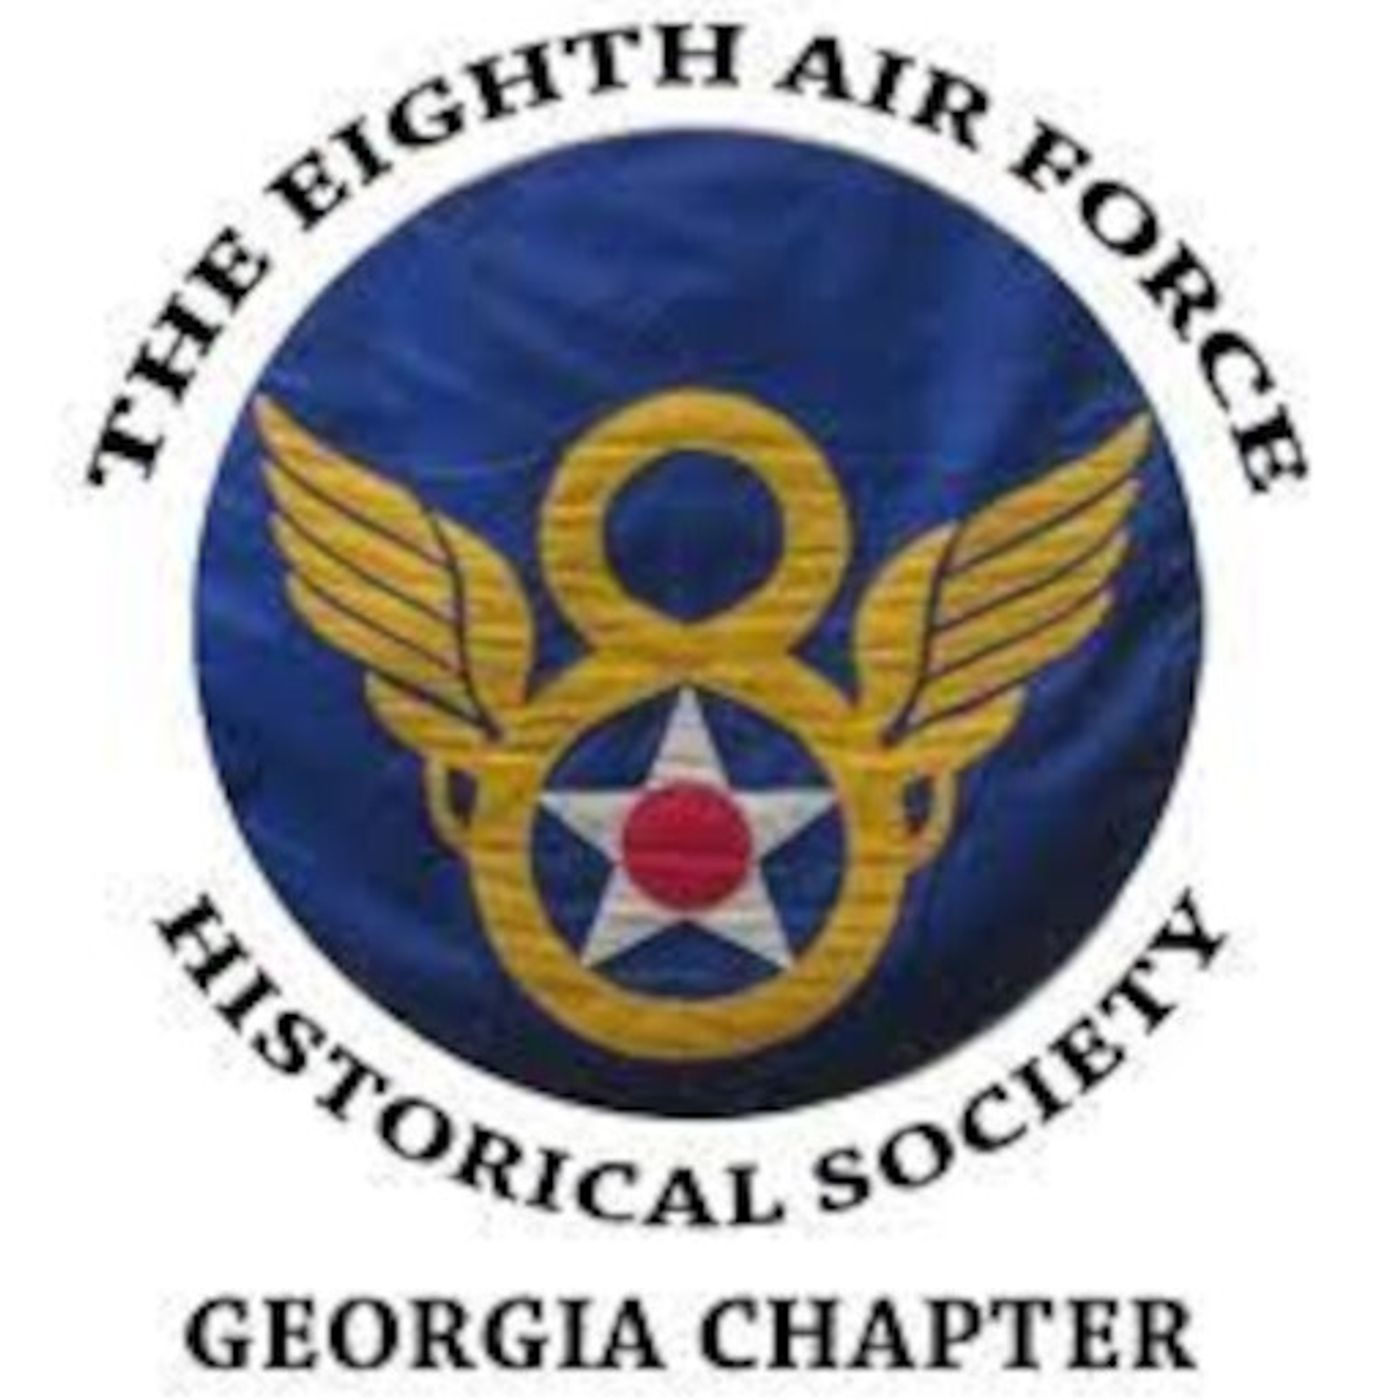 38: Author Steve Snyder's presentation at The Eighth Air Force Historical Society, Georgia Chapter